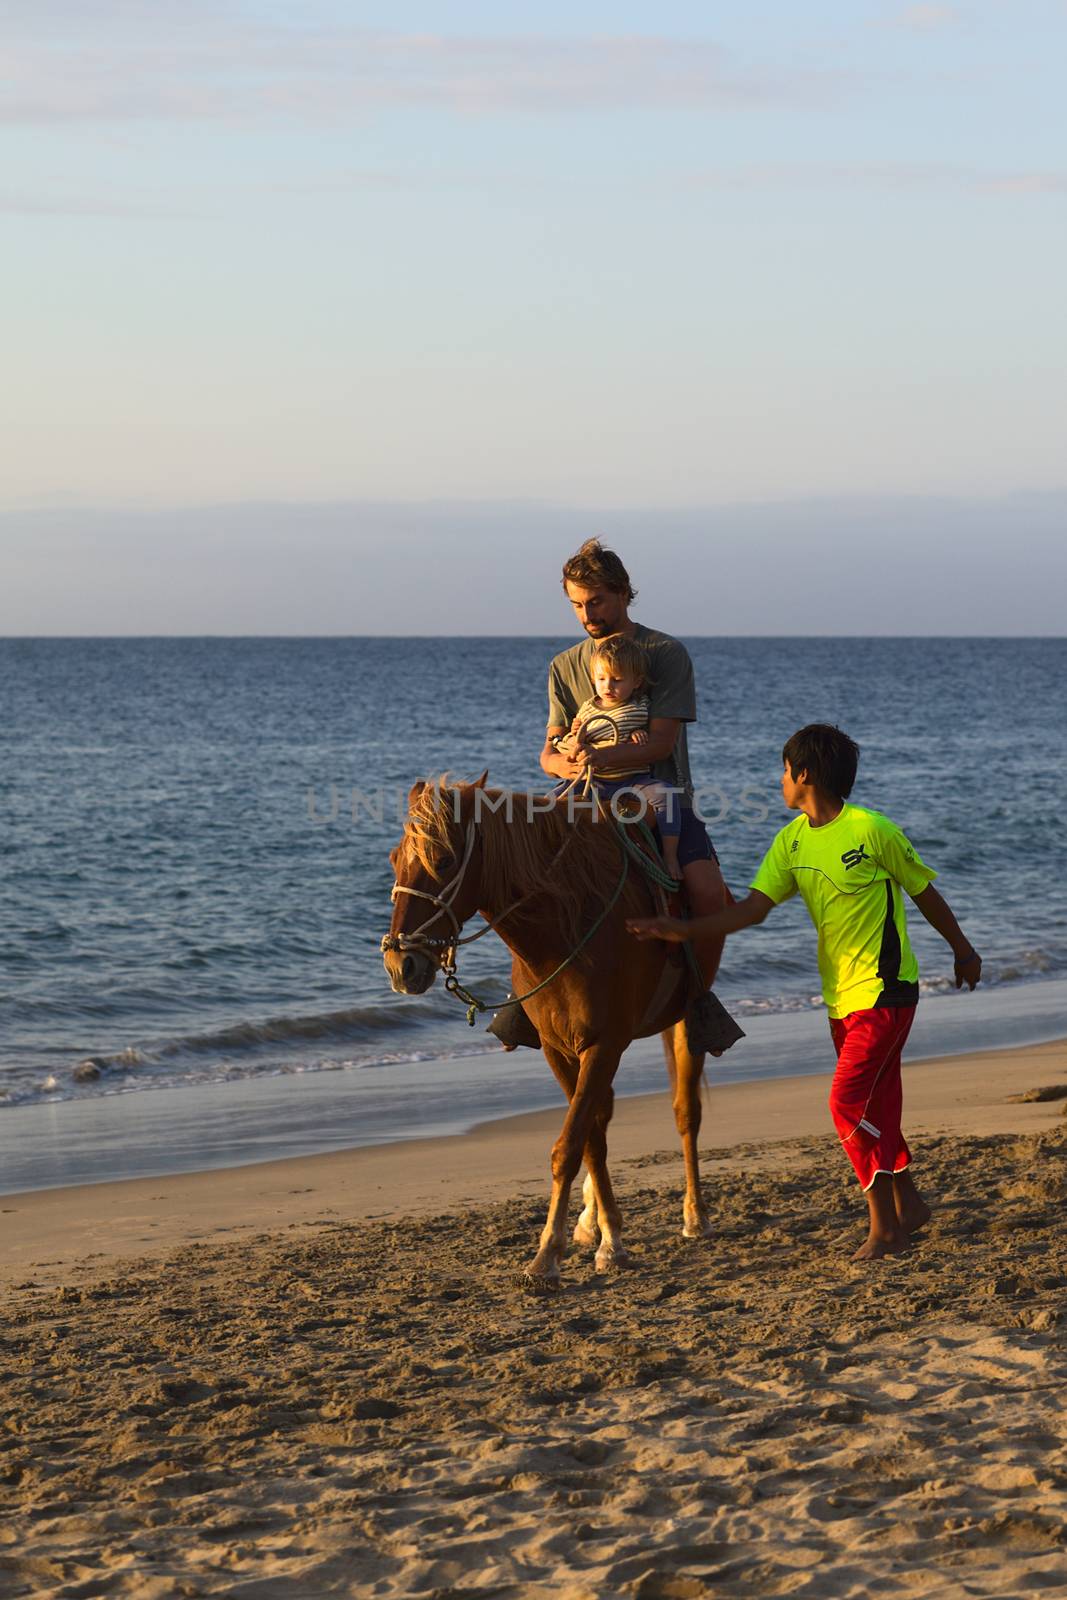 MANCORA, PERU - AUGUST 20, 2013: Unidentified young man and child on horseback, with unidentified boy walking along the horse on the beach on August 20, 2013 in Mancora, Peru. Mancora is a popular beach town in Peru for both Peruvian and foreign tourists.   